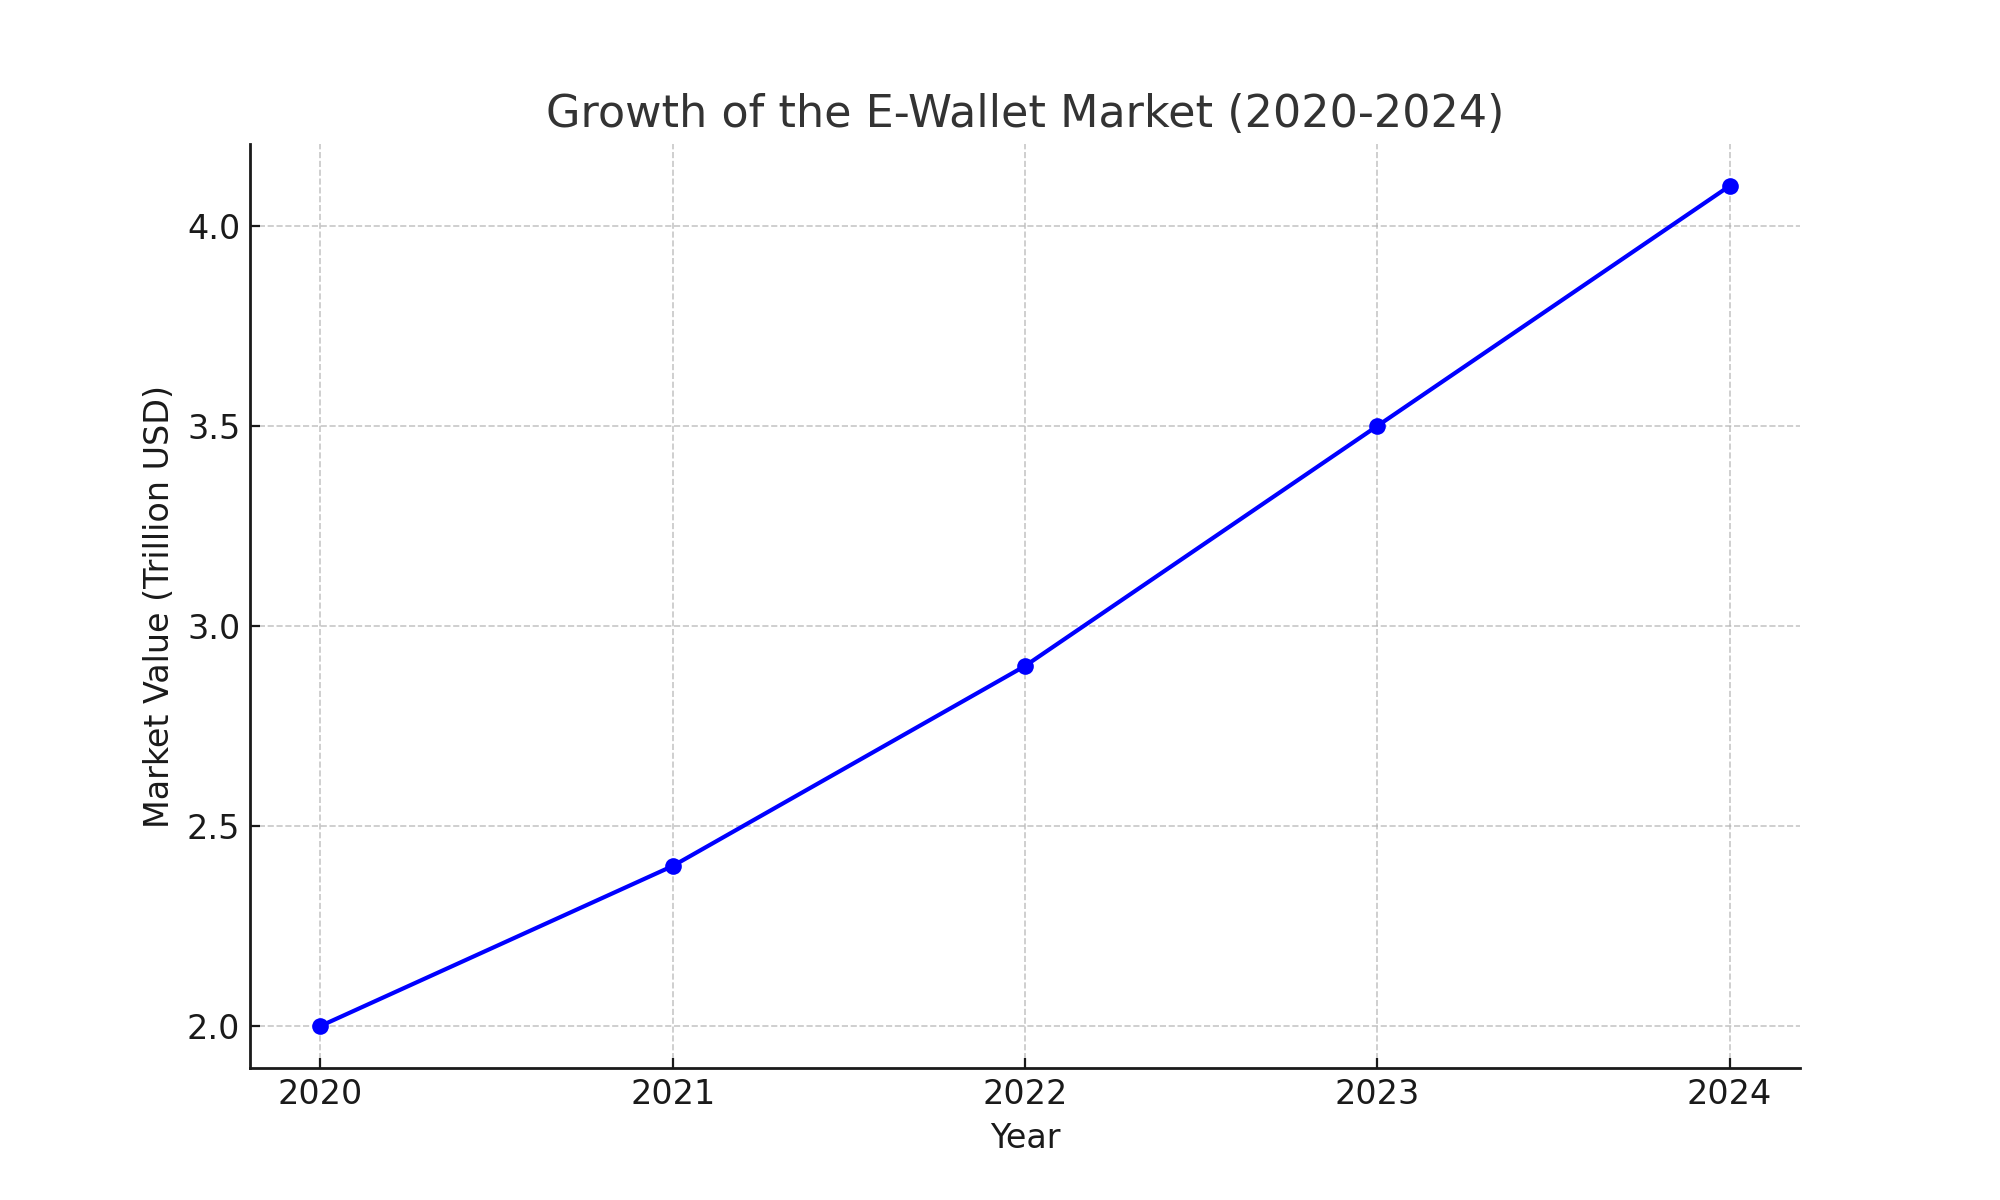 Growth of the e-wallet market (2020-2024)